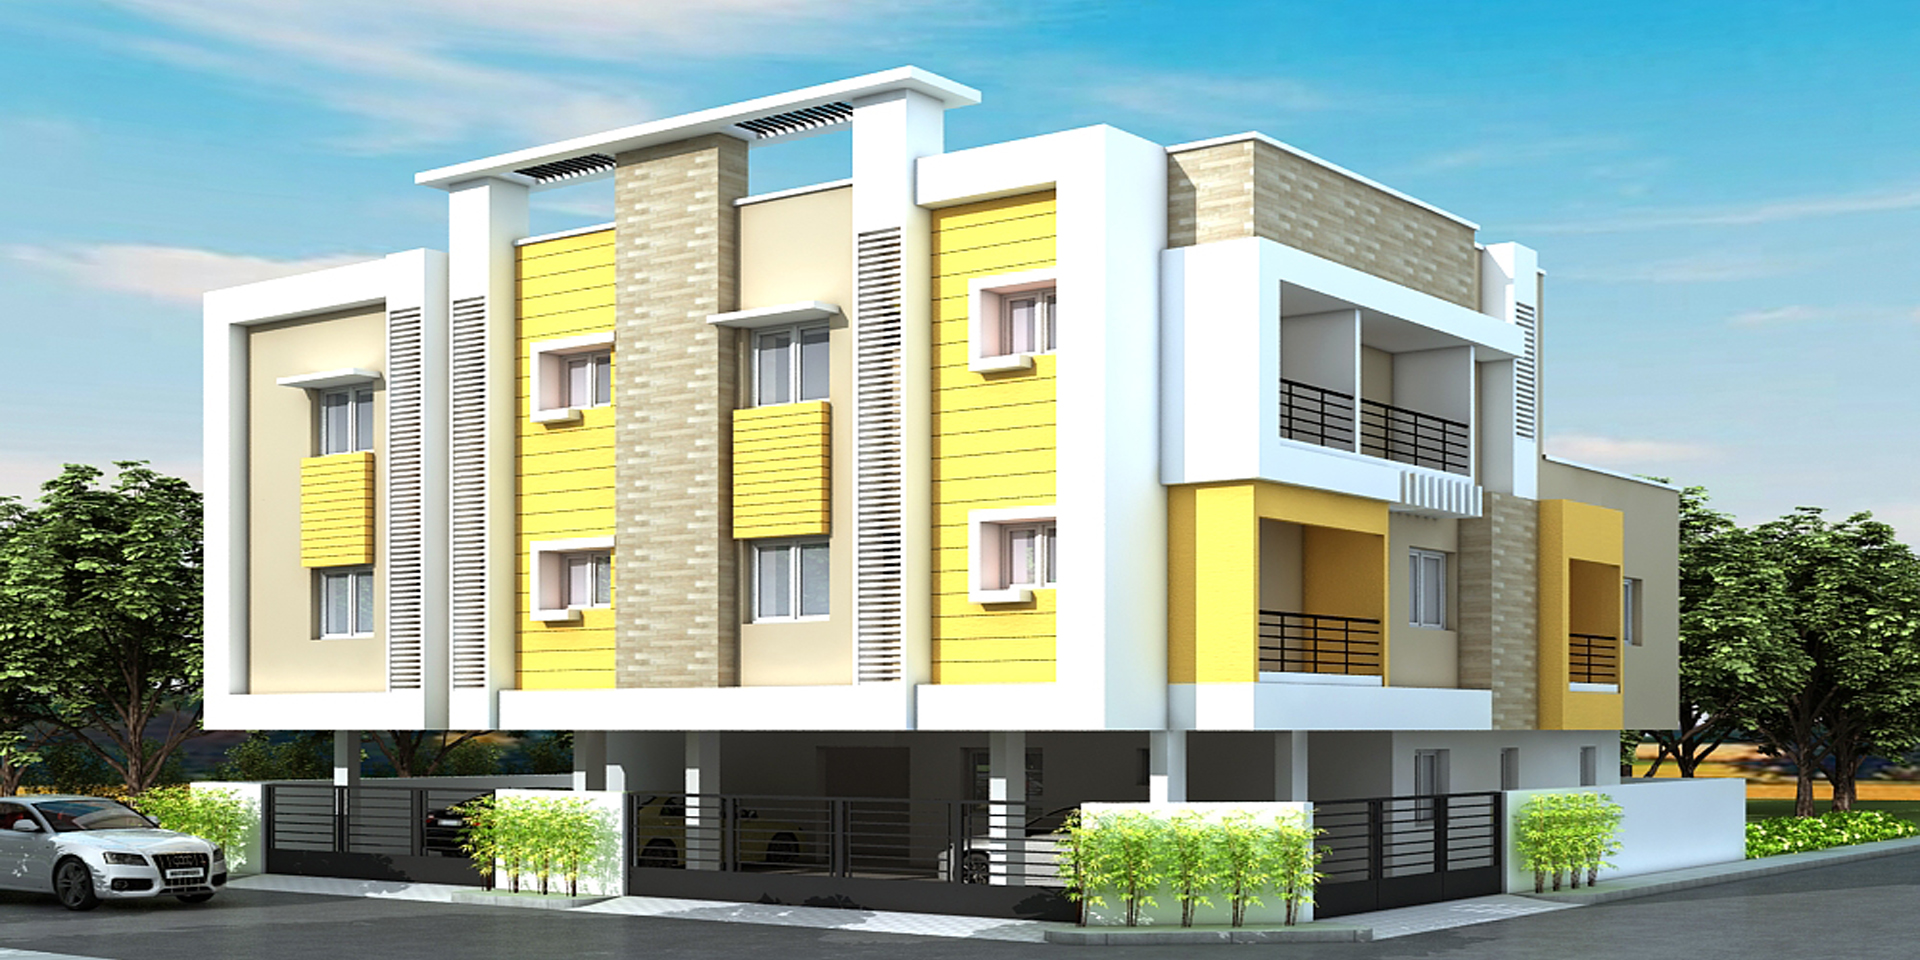 2 BHK Apartment for sale in Polichalur